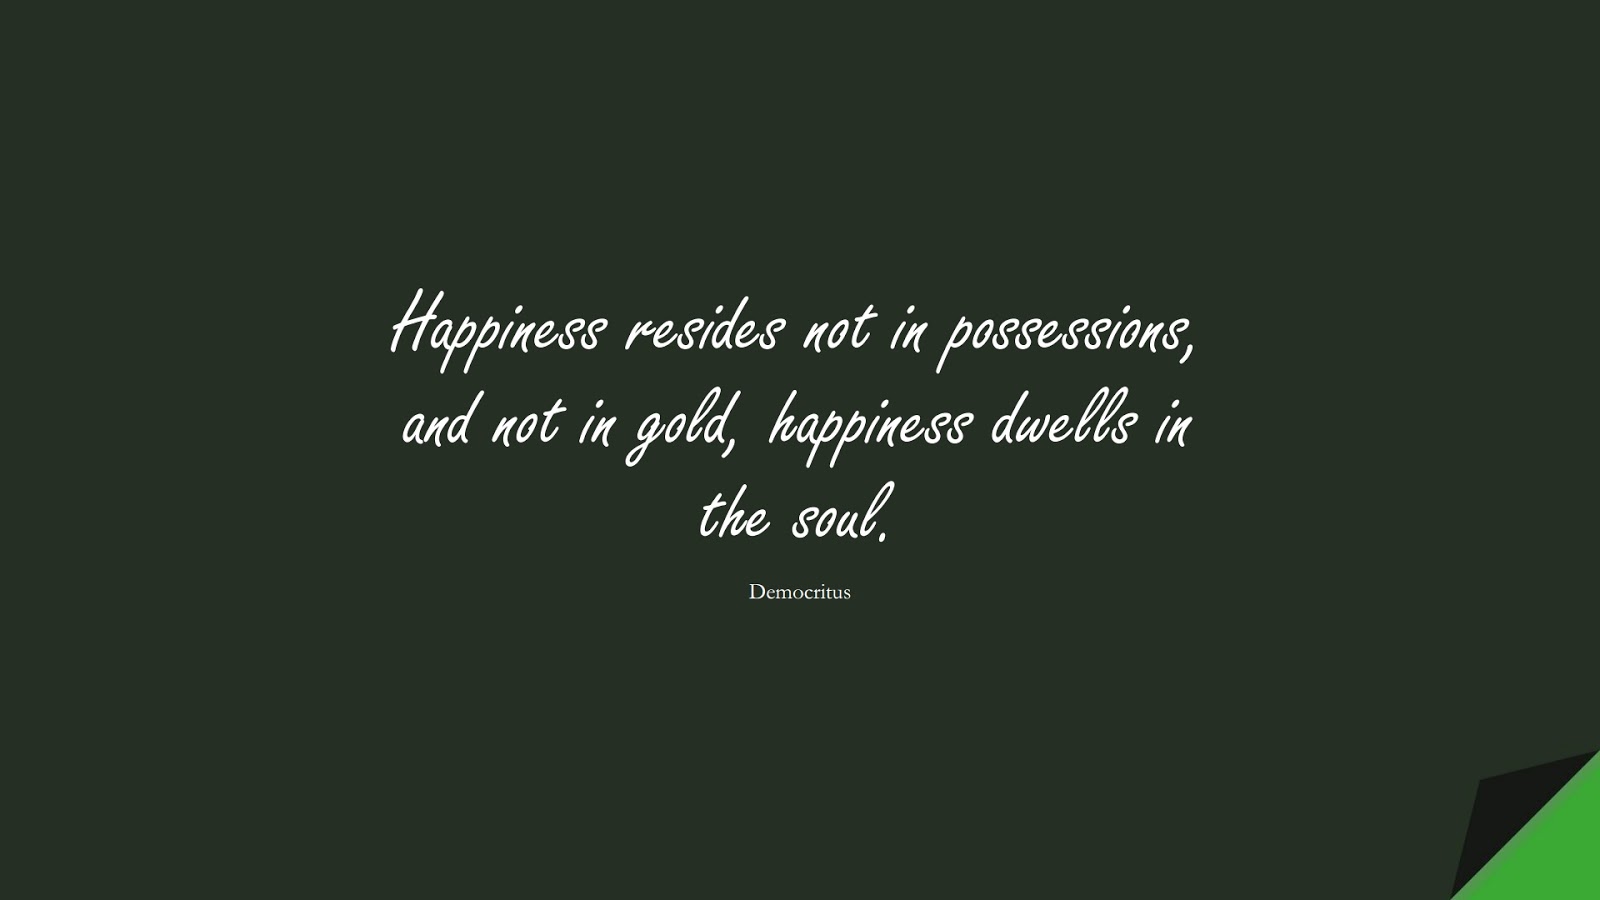 Happiness resides not in possessions, and not in gold, happiness dwells in the soul. (Democritus);  #WordsofWisdom